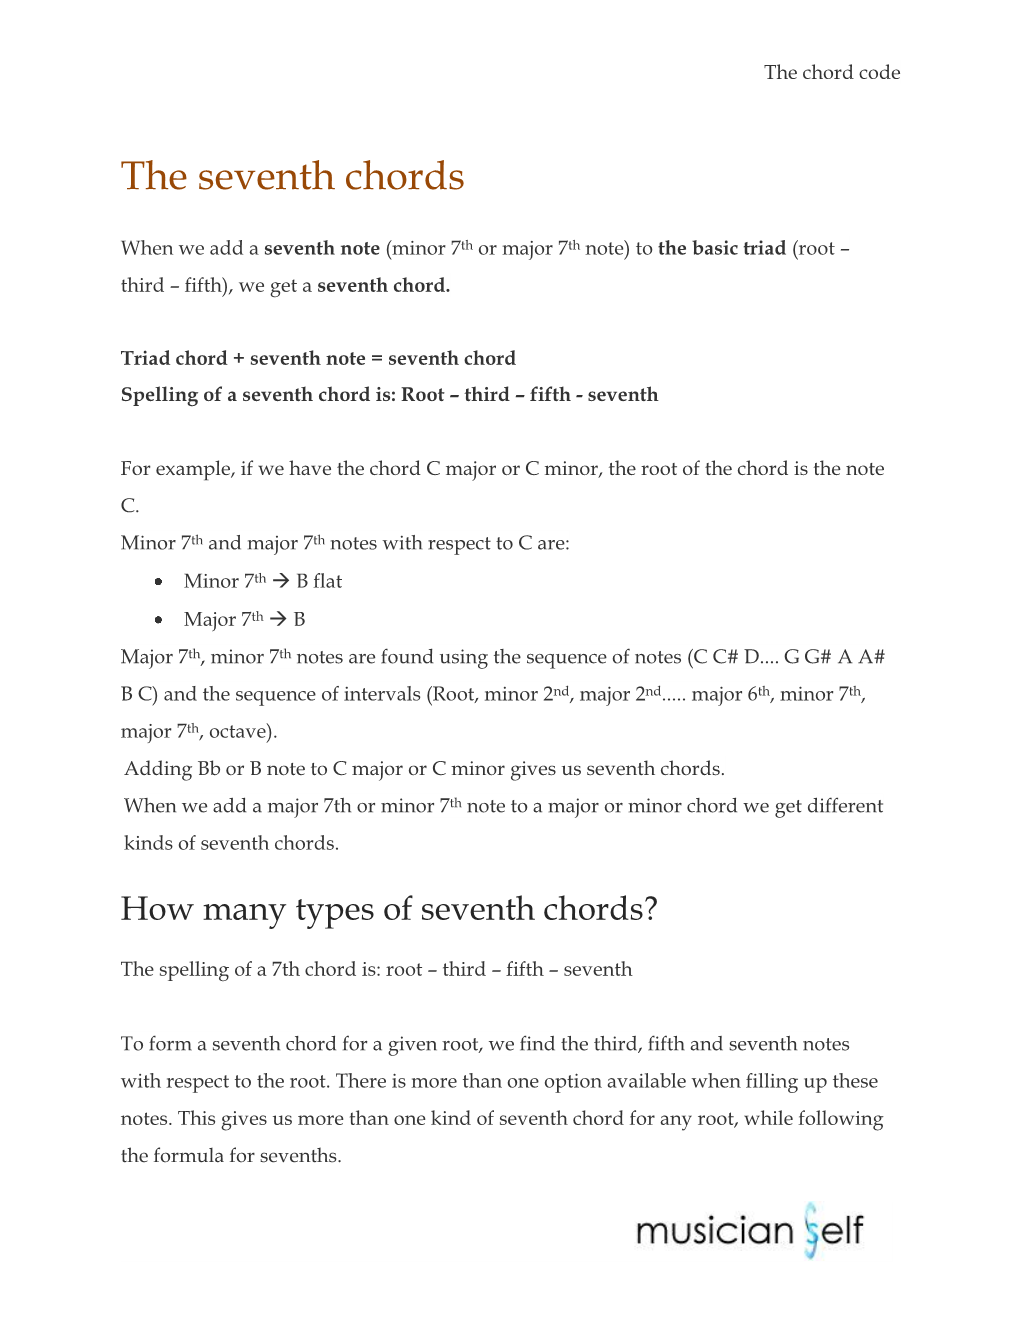 The Seventh Chords